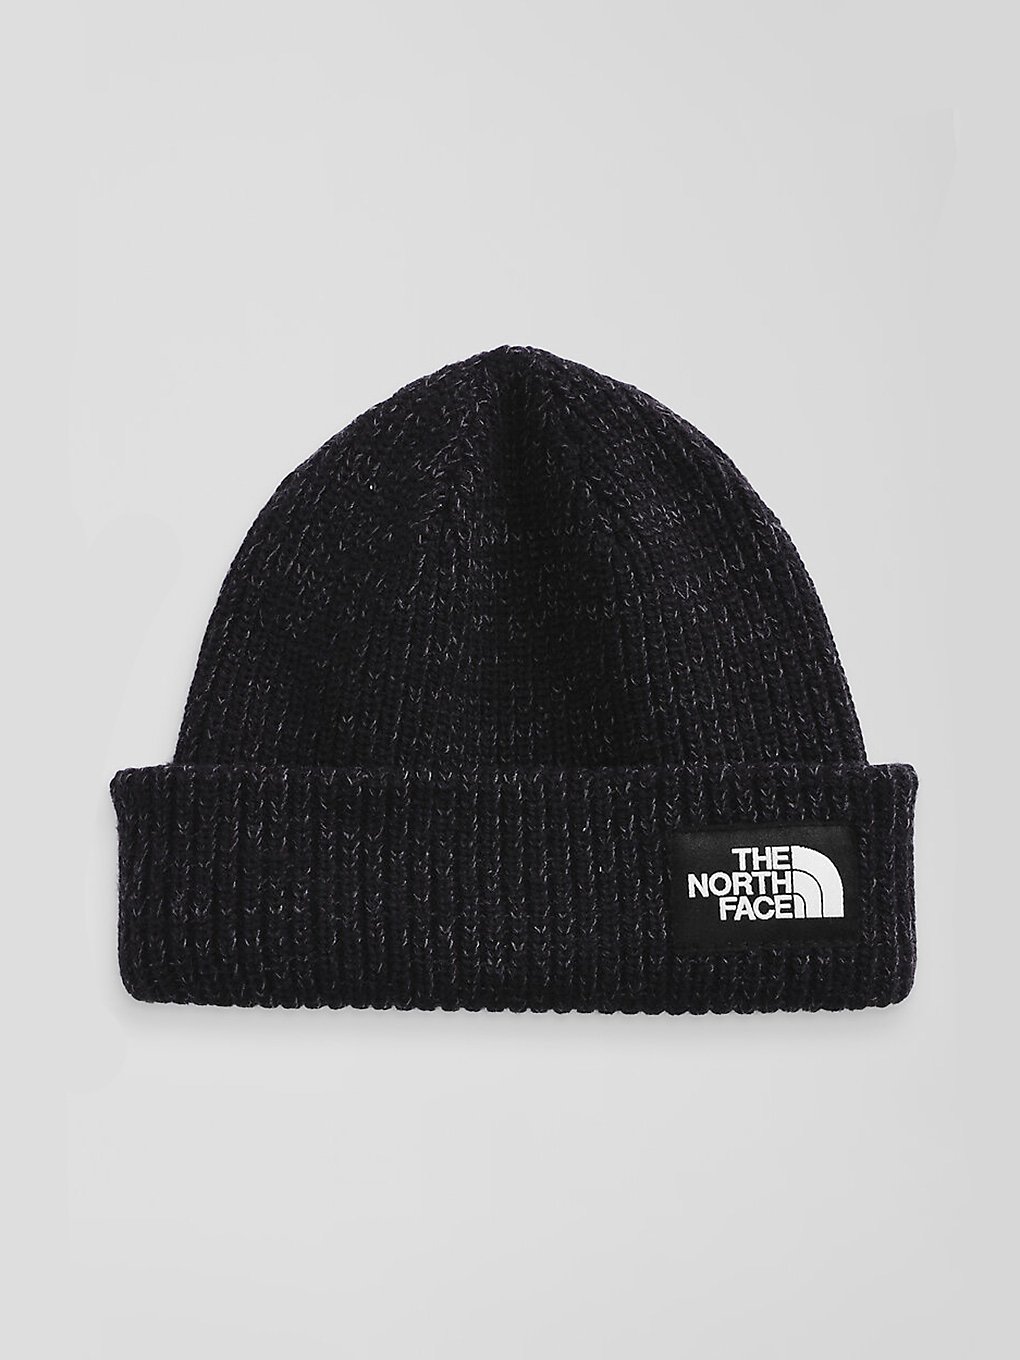 THE NORTH FACE Salty Dog Lined Beanie tnf black kaufen